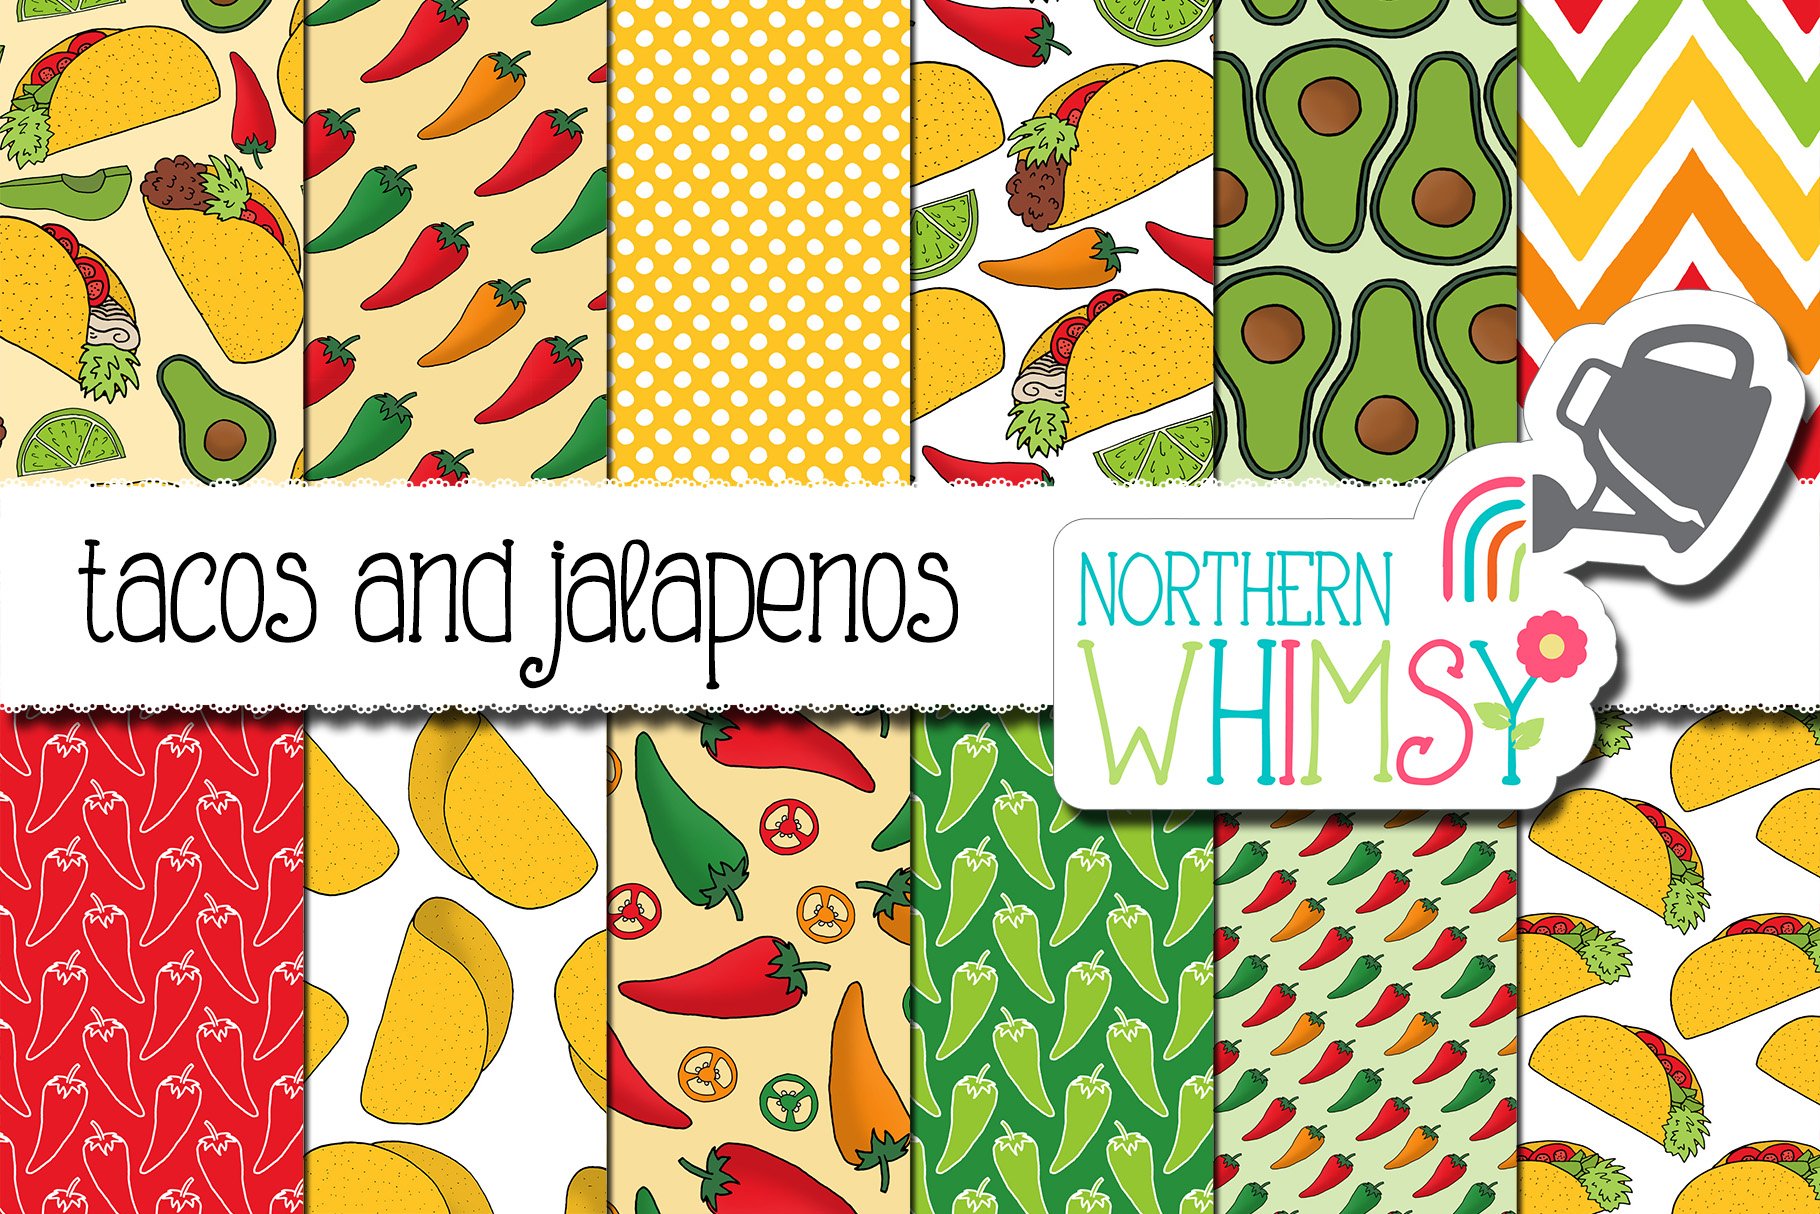 Taco Seamless Patterns cover image.